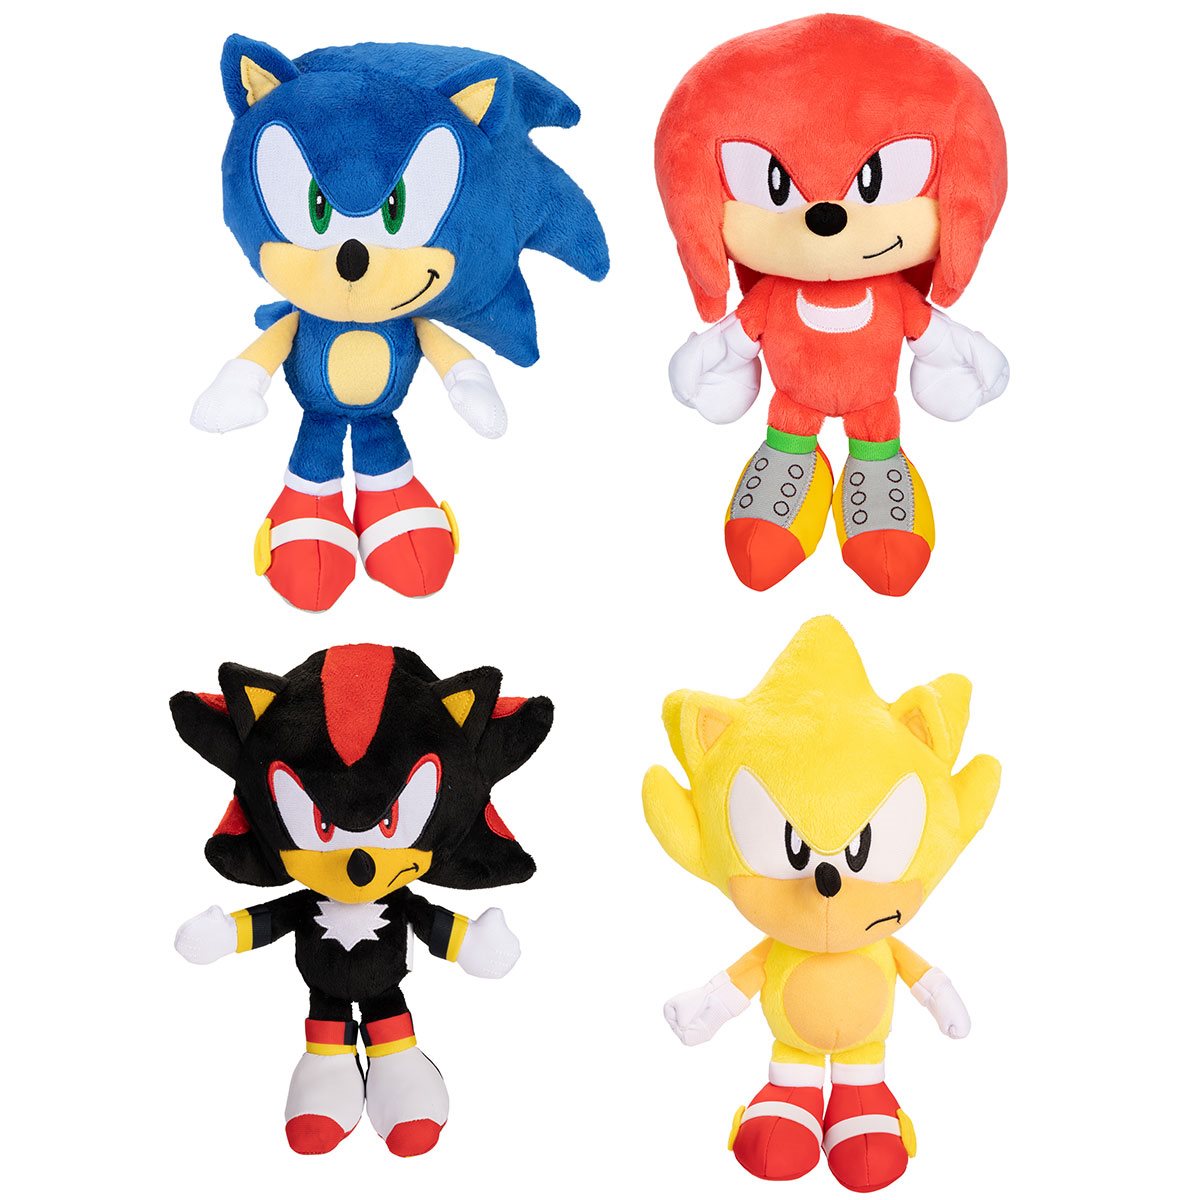 16-Inch Sonic the Hedgehog Amy Plush Backpack